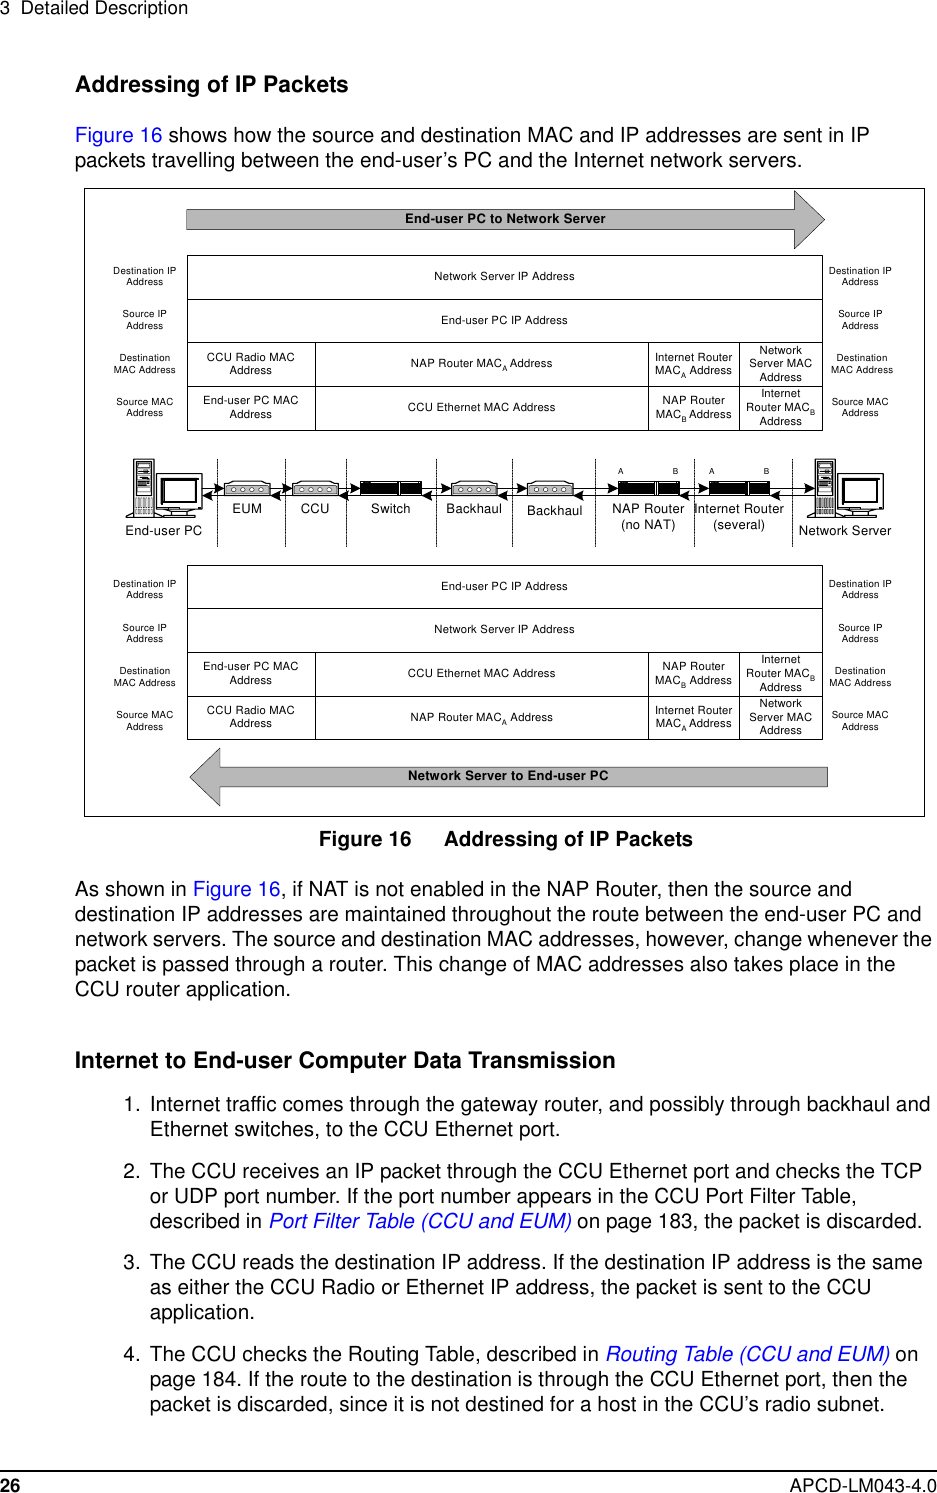 3 Detailed Description26 APCD-LM043-4.0Addressing of IP PacketsFigure 16 shows how the source and destination MAC and IP addresses are sent in IPpackets travelling between the end-user’s PC and the Internet network servers.Figure 16 Addressing of IP PacketsAs shown in Figure 16, if NAT is not enabled in the NAP Router, then the source anddestination IP addresses are maintained throughout the route between the end-user PC andnetwork servers. The source and destination MAC addresses, however, change whenever thepacket is passed through a router. This change of MAC addresses also takes place in theCCU router application.Internet to End-user Computer Data Transmission1. Internet traffic comes through the gateway router, and possibly through backhaul andEthernet switches, to the CCU Ethernet port.2. The CCU receives an IP packet through the CCU Ethernet port and checks the TCPor UDP port number. If the port number appears in the CCU Port Filter Table,described in Port Filter Table (CCU and EUM) on page 183, the packet is discarded.3. The CCU reads the destination IP address. If the destination IP address is the sameas either the CCU Radio or Ethernet IP address, the packet is sent to the CCUapplication.4. The CCU checks the Routing Table, described in Routing Table (CCU and EUM) onpage 184. If the route to the destination is through the CCU Ethernet port, then thepacket is discarded, since it is not destined for a host in the CCU’s radio subnet.Network ServerNAP Router(no NAT)EUM CCU BackhaulSwitchEnd-user PCInternet Router(several)Network Server IP AddressEnd-user PC IP AddressEnd-user PC MACAddressCCU Radio MACAddressDestination IPAddressSource IPAddressDestinationMAC AddressSource MACAddressAABBDestination IPAddressSource IPAddressDestinationMAC AddressSource MACAddressDestination IPAddressSource IPAddressDestinationMAC AddressSource MACAddressDestination IPAddressSource IPAddressDestinationMAC AddressSource MACAddressNAP Router MACAAddressCCU Ethernet MAC AddressInternet RouterMACAAddressNetworkServer MACAddressNAP RouterMACBAddressInternetRouter MACBAddressEnd-user PC IP AddressNetwork Server IP AddressCCU Radio MACAddressEnd-user PC MACAddress CCU Ethernet MAC AddressNAP Router MACAAddressNAP RouterMACBAddressInternetRouter MACBAddressInternet RouterMACAAddressNetworkServer MACAddressEnd-user PC to Network ServerNetwork Server to End-user PCBackhaul